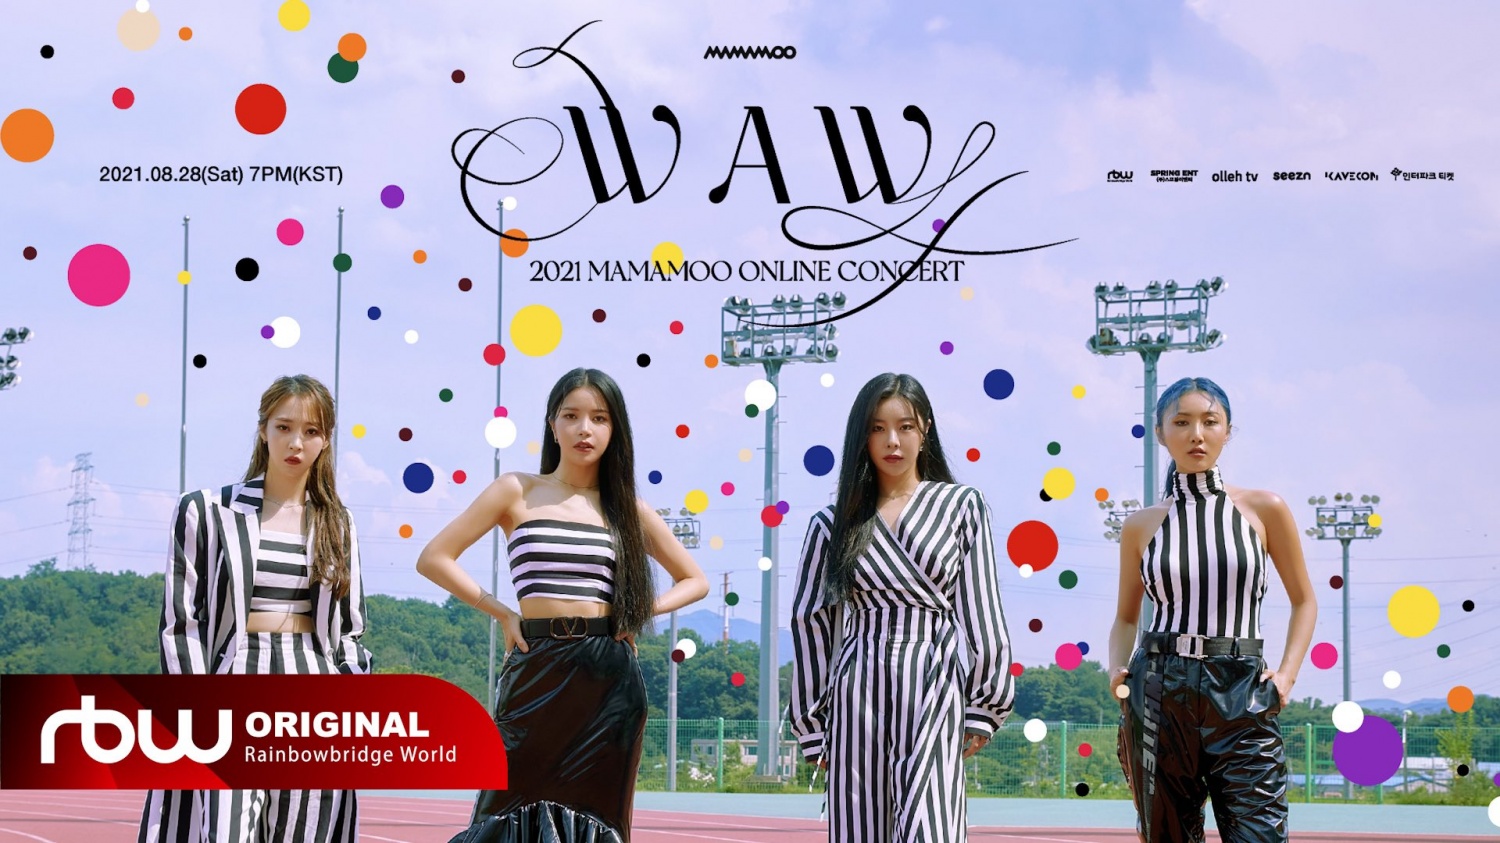 Mamamoo, online concert ‘WAW’ lovely teaser released… radiating bright energy